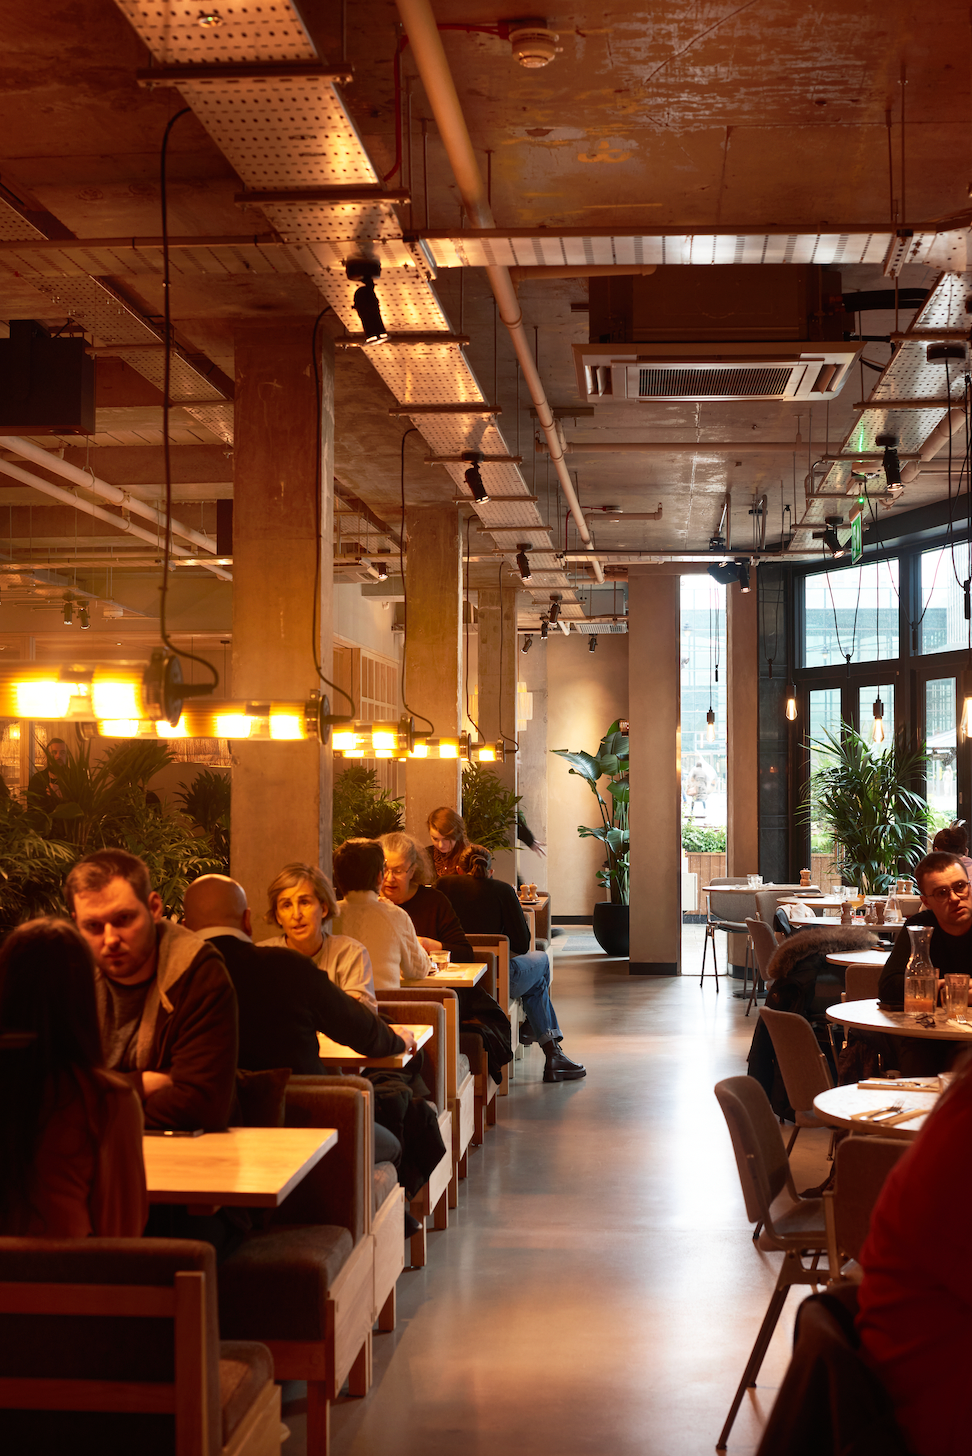 Private dining, party, event space and corporate events at Caravan Canary Wharf restaurant